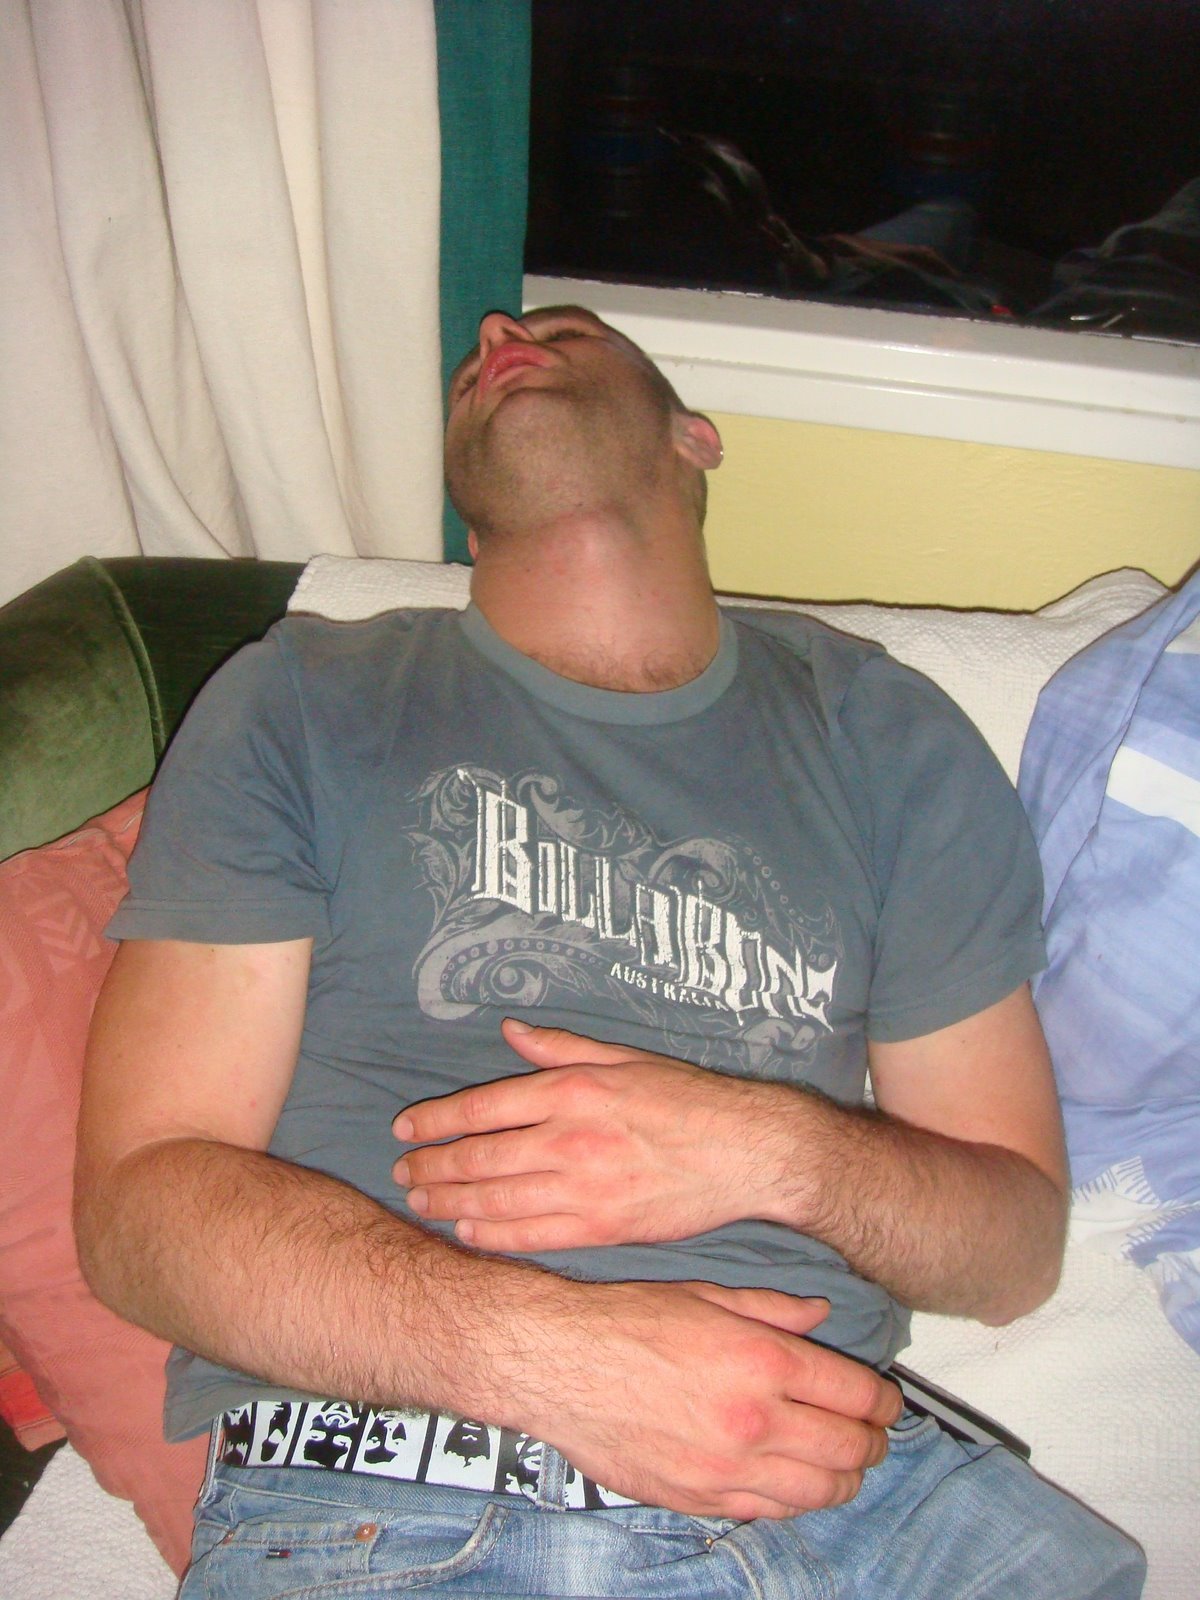 [CouchSurfing+Nights+Out+019.jpg]